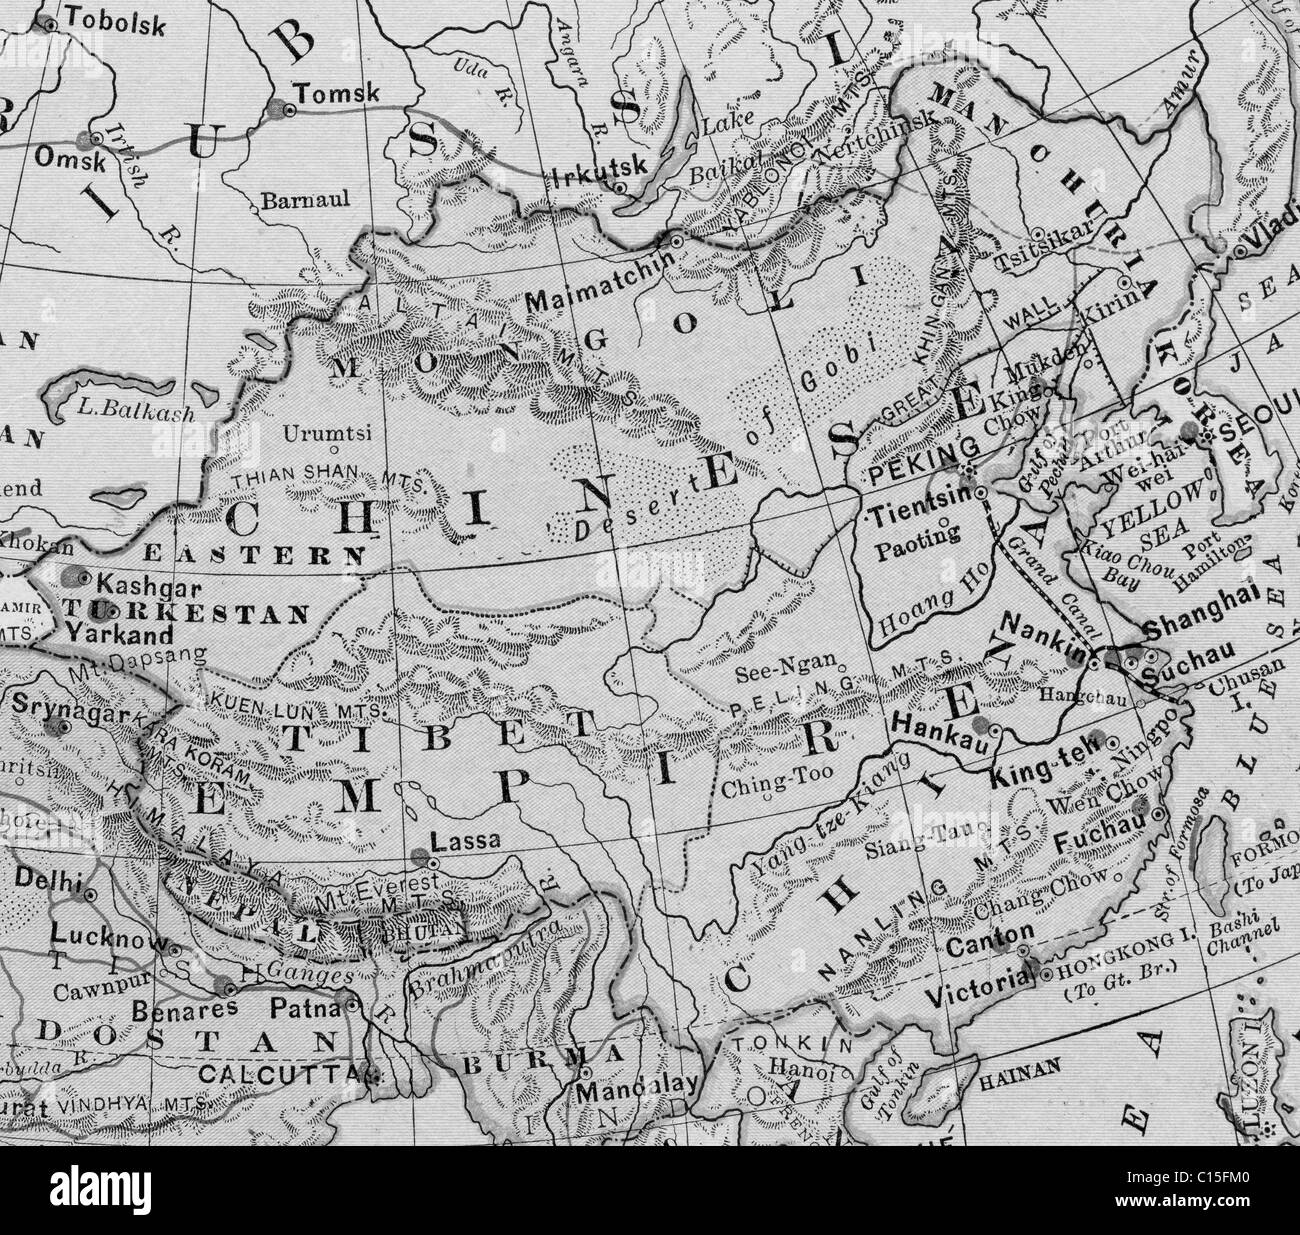 Old map of Chinese Empire from original geography textbook, 1884 Stock Photo